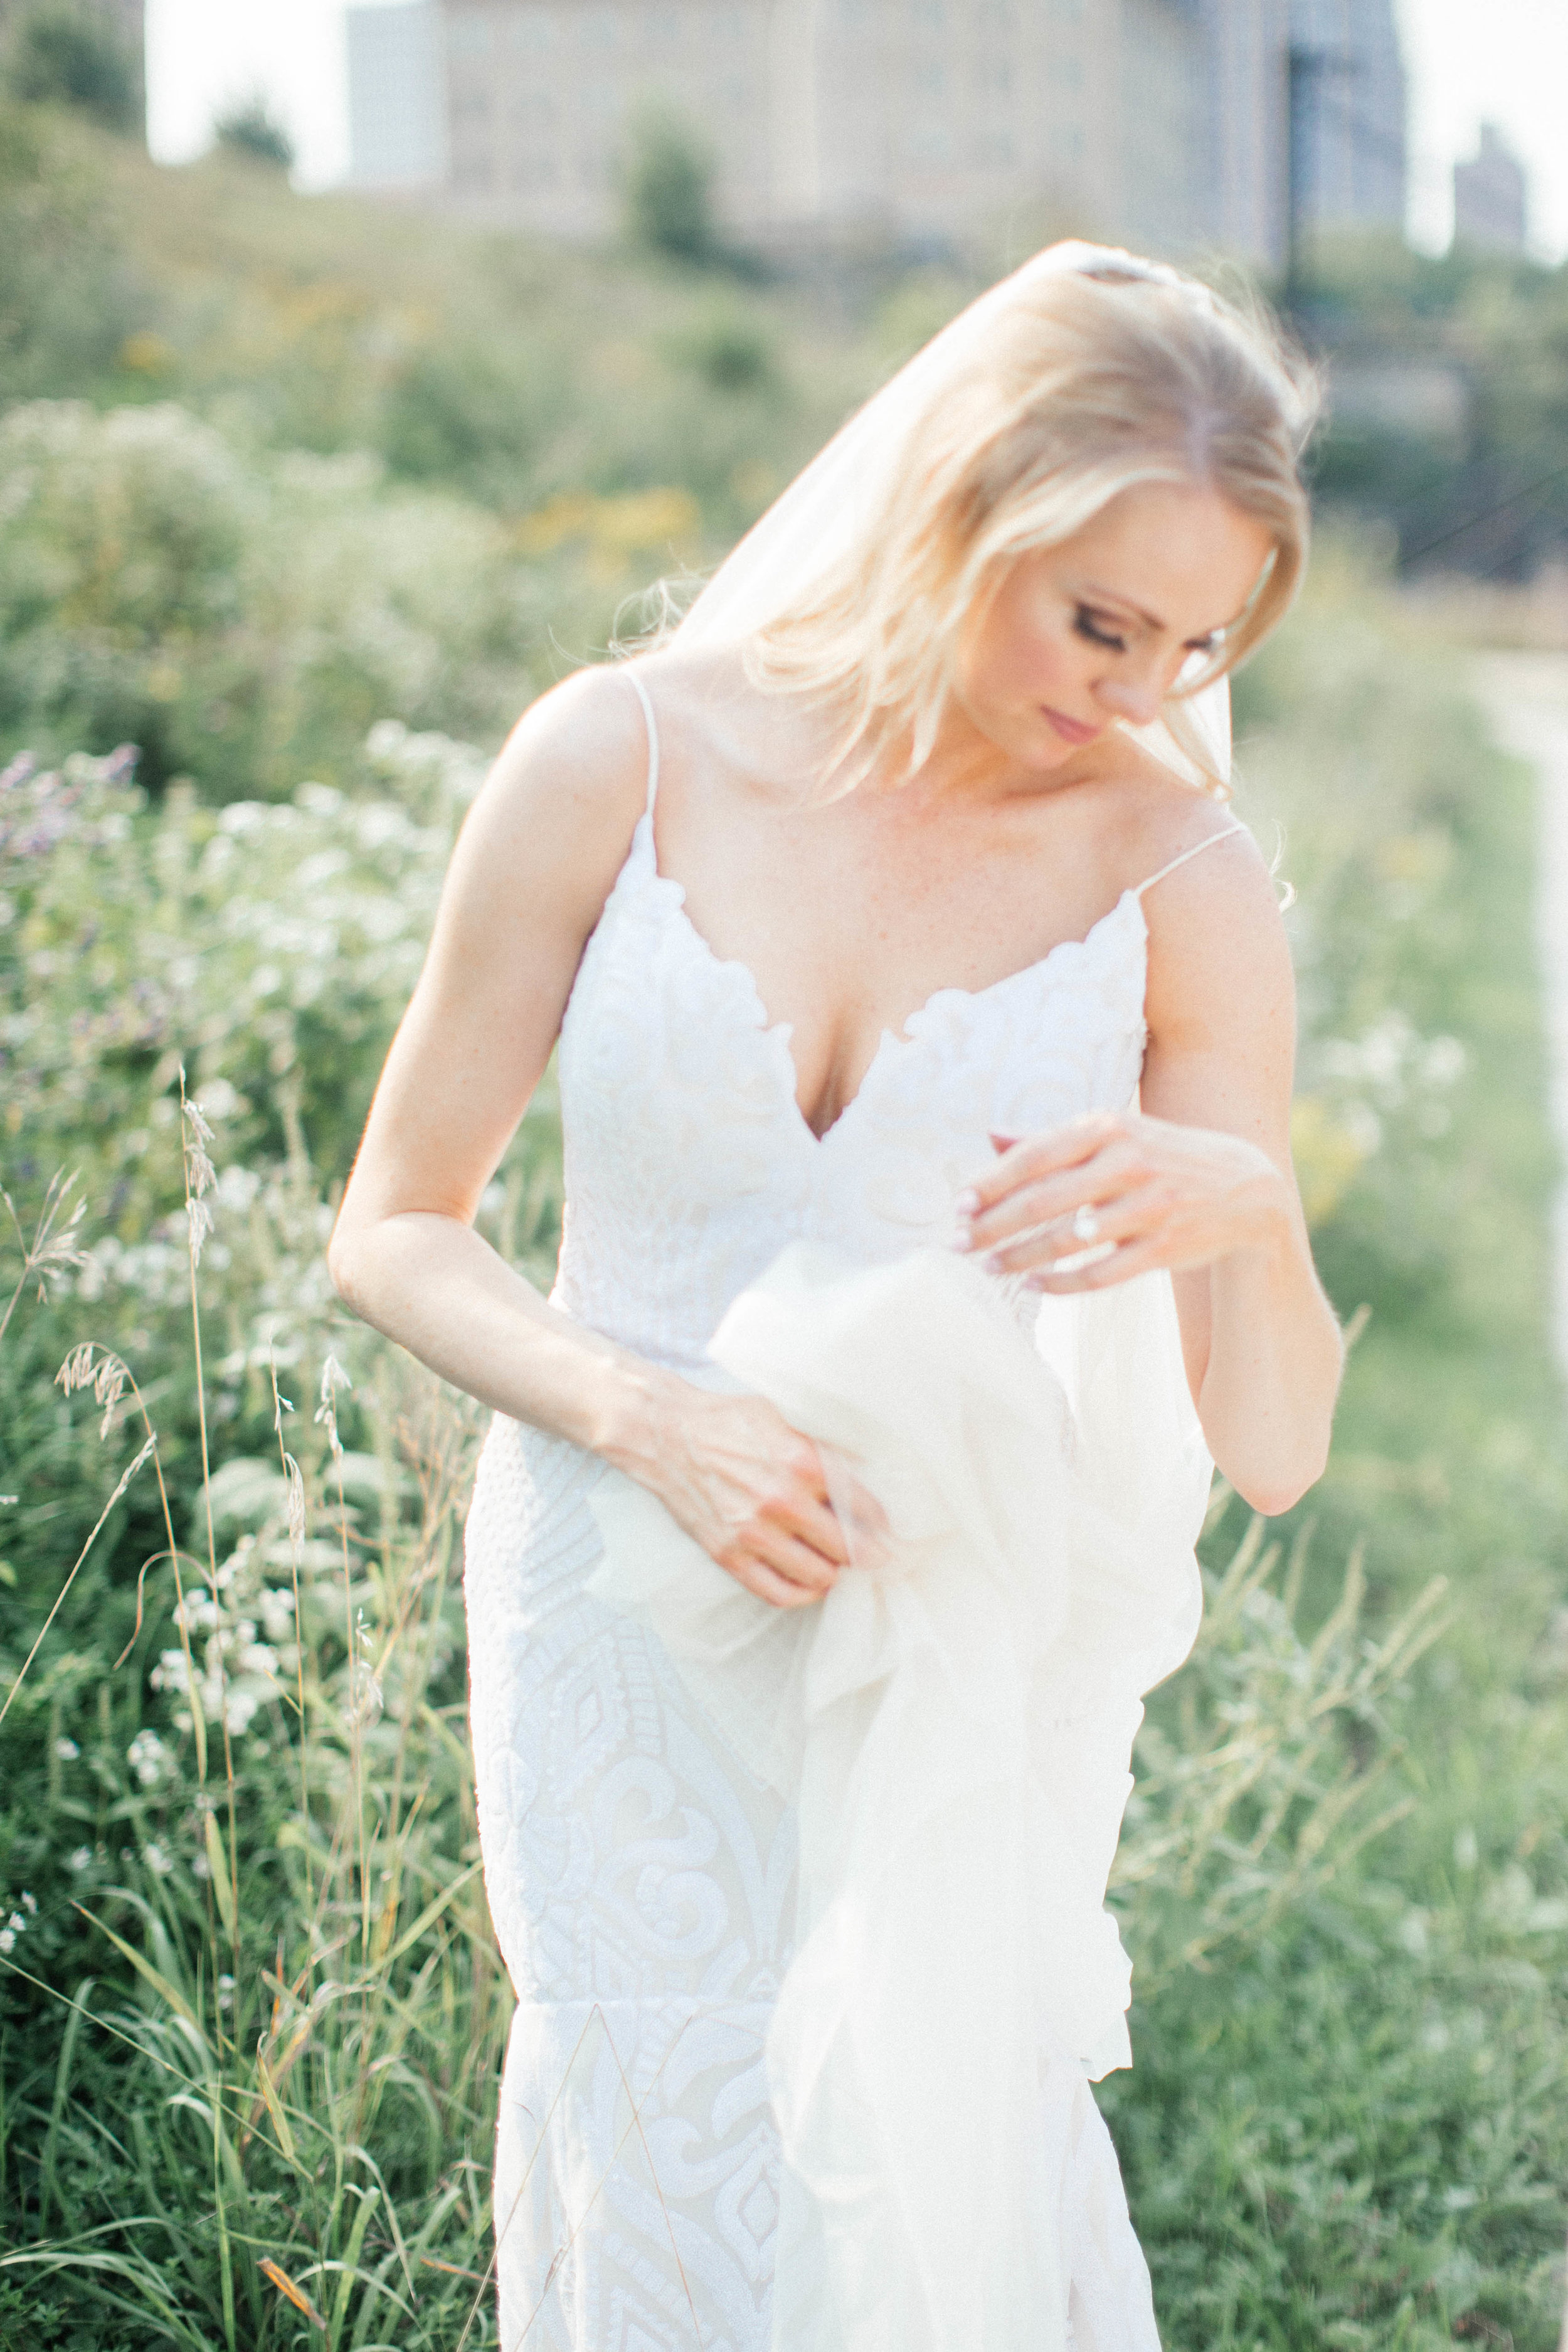 Bridal portrait at the mill city ruins